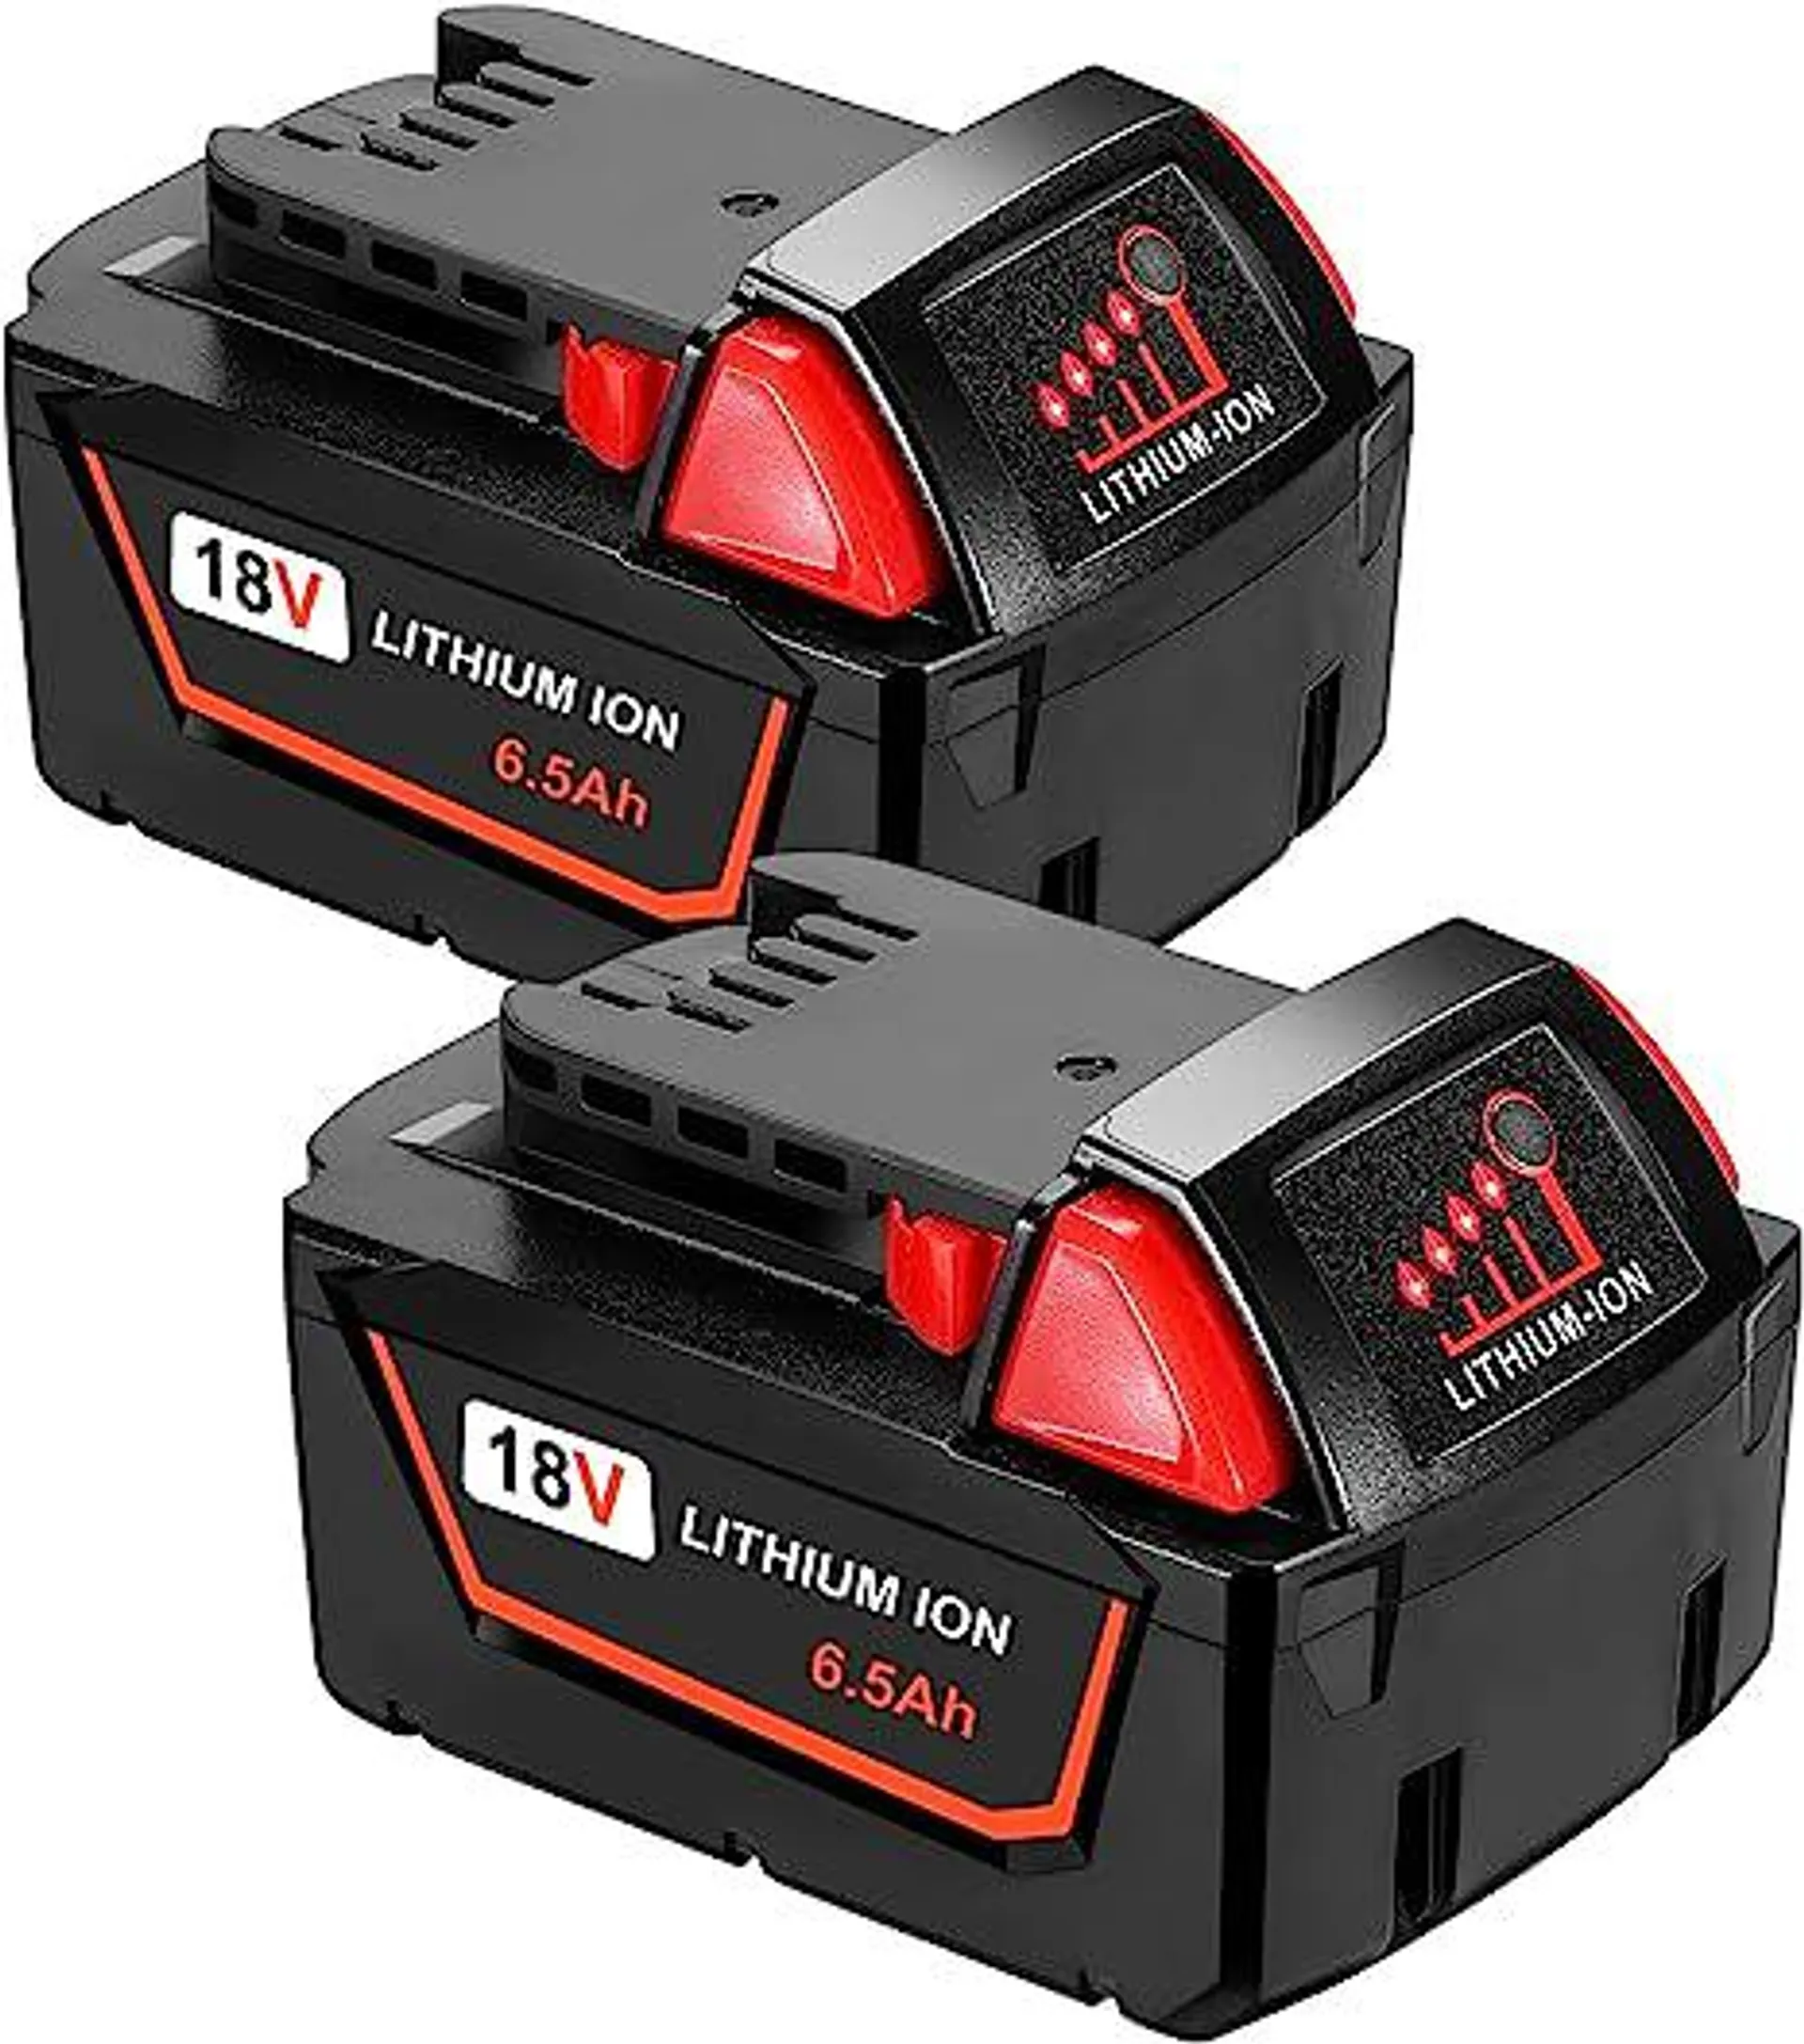 HUSUE 6.5Ah 18V Replacement Battery for Milwaukee M18 Battery, Lithium Battery Compatible with Milwaukee M18 18V 48-11-1815, 48-11-1820, 48-11-1840, 48-11-1850, 48-11-1860 Cordless Power Tools, 2 Pack